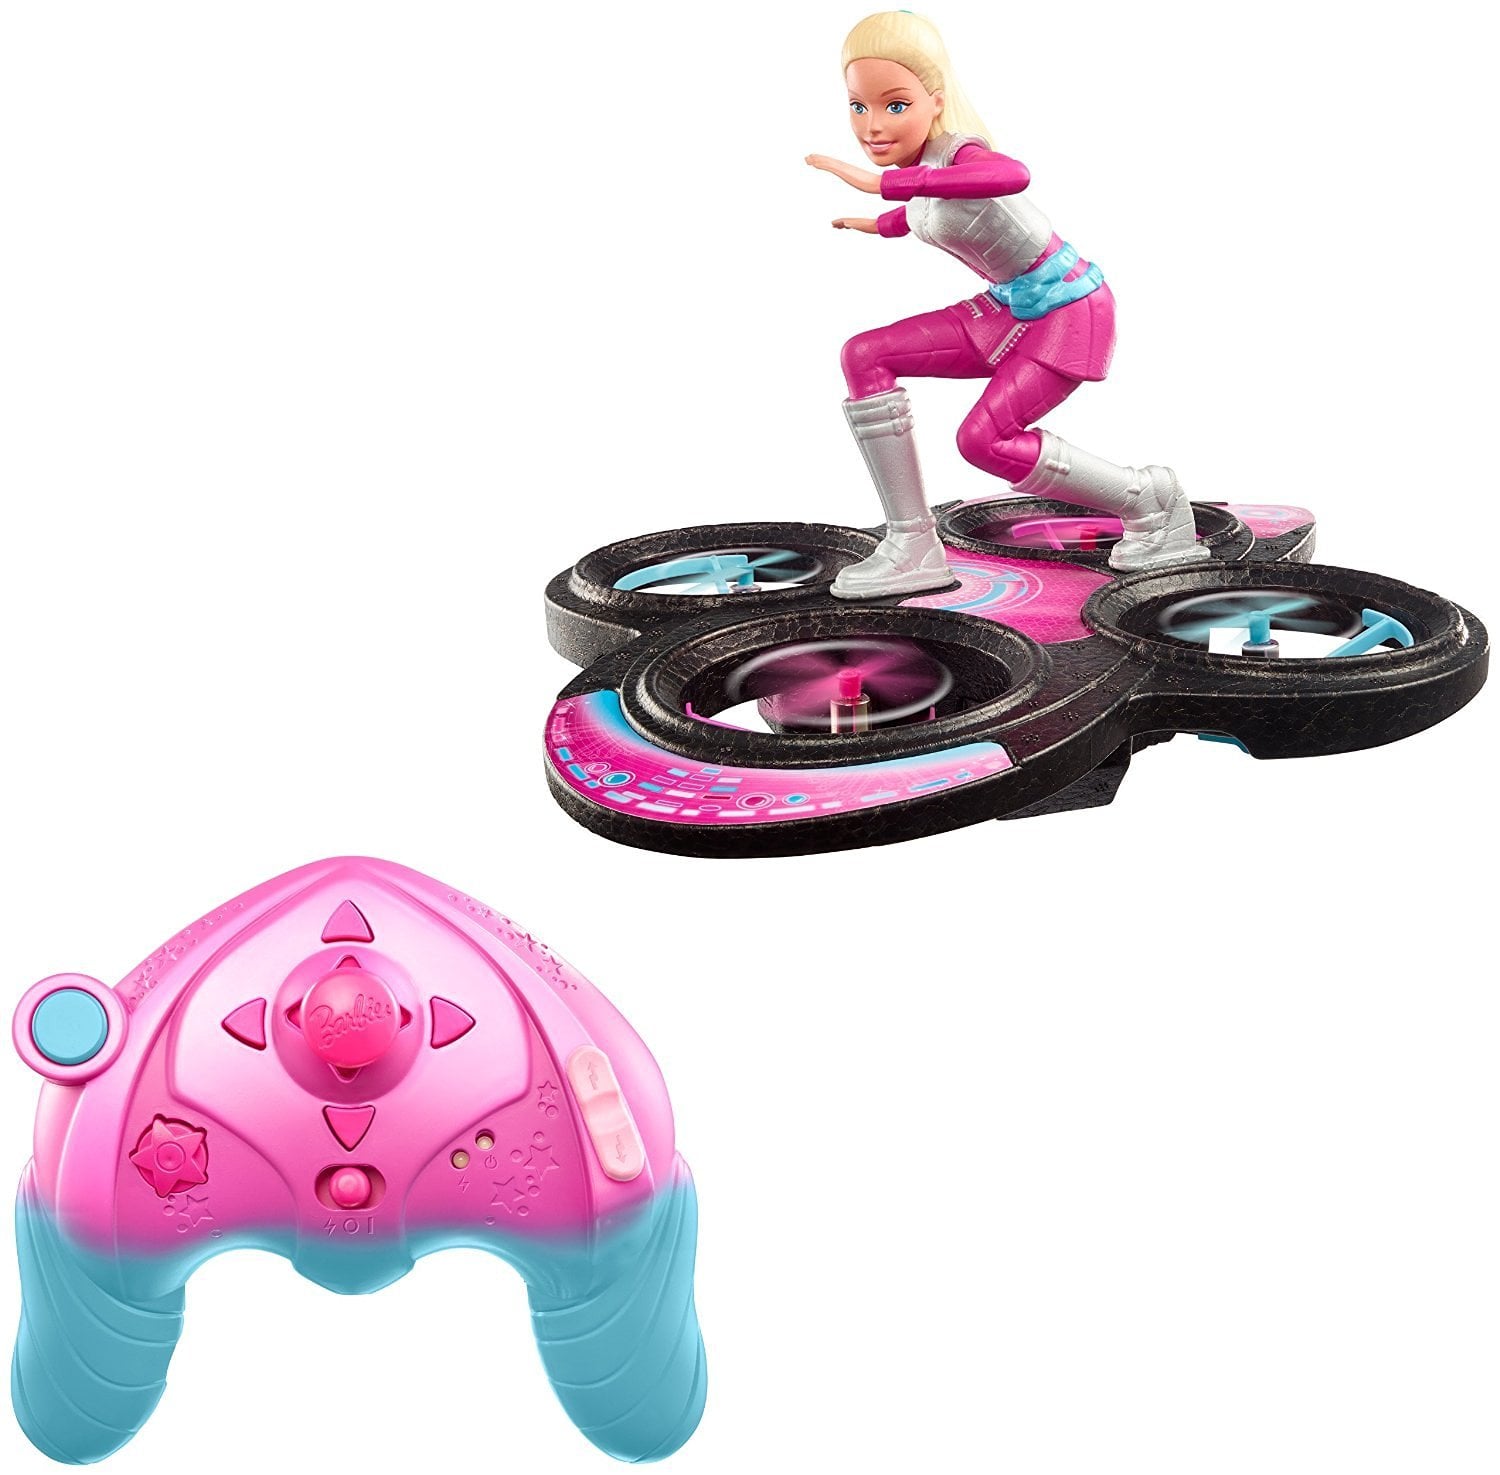 Production center lease Retouch Barbie Star Light Adventure Flying RC Hoverboard Doll ($40, | 9 Creative  Themes (and Gift Ideas!) to Get You Through All 8 Nights of Hanukkah |  POPSUGAR Family Photo 7